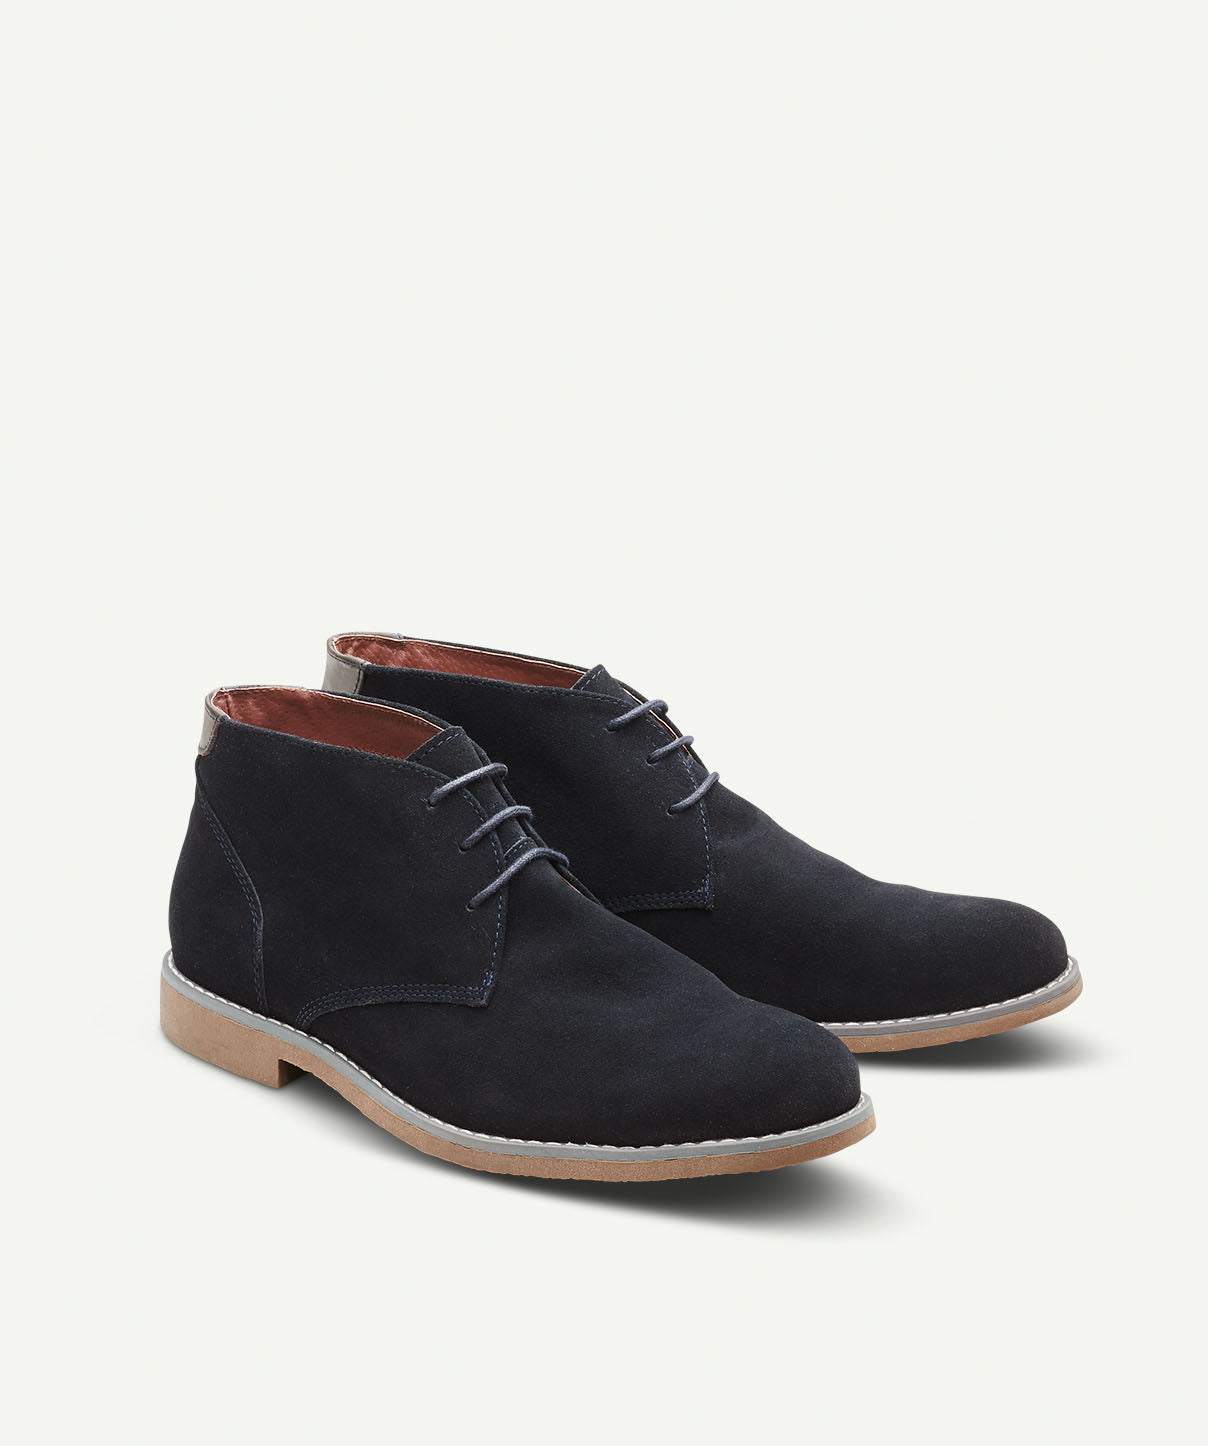 hush puppies suede boots mens